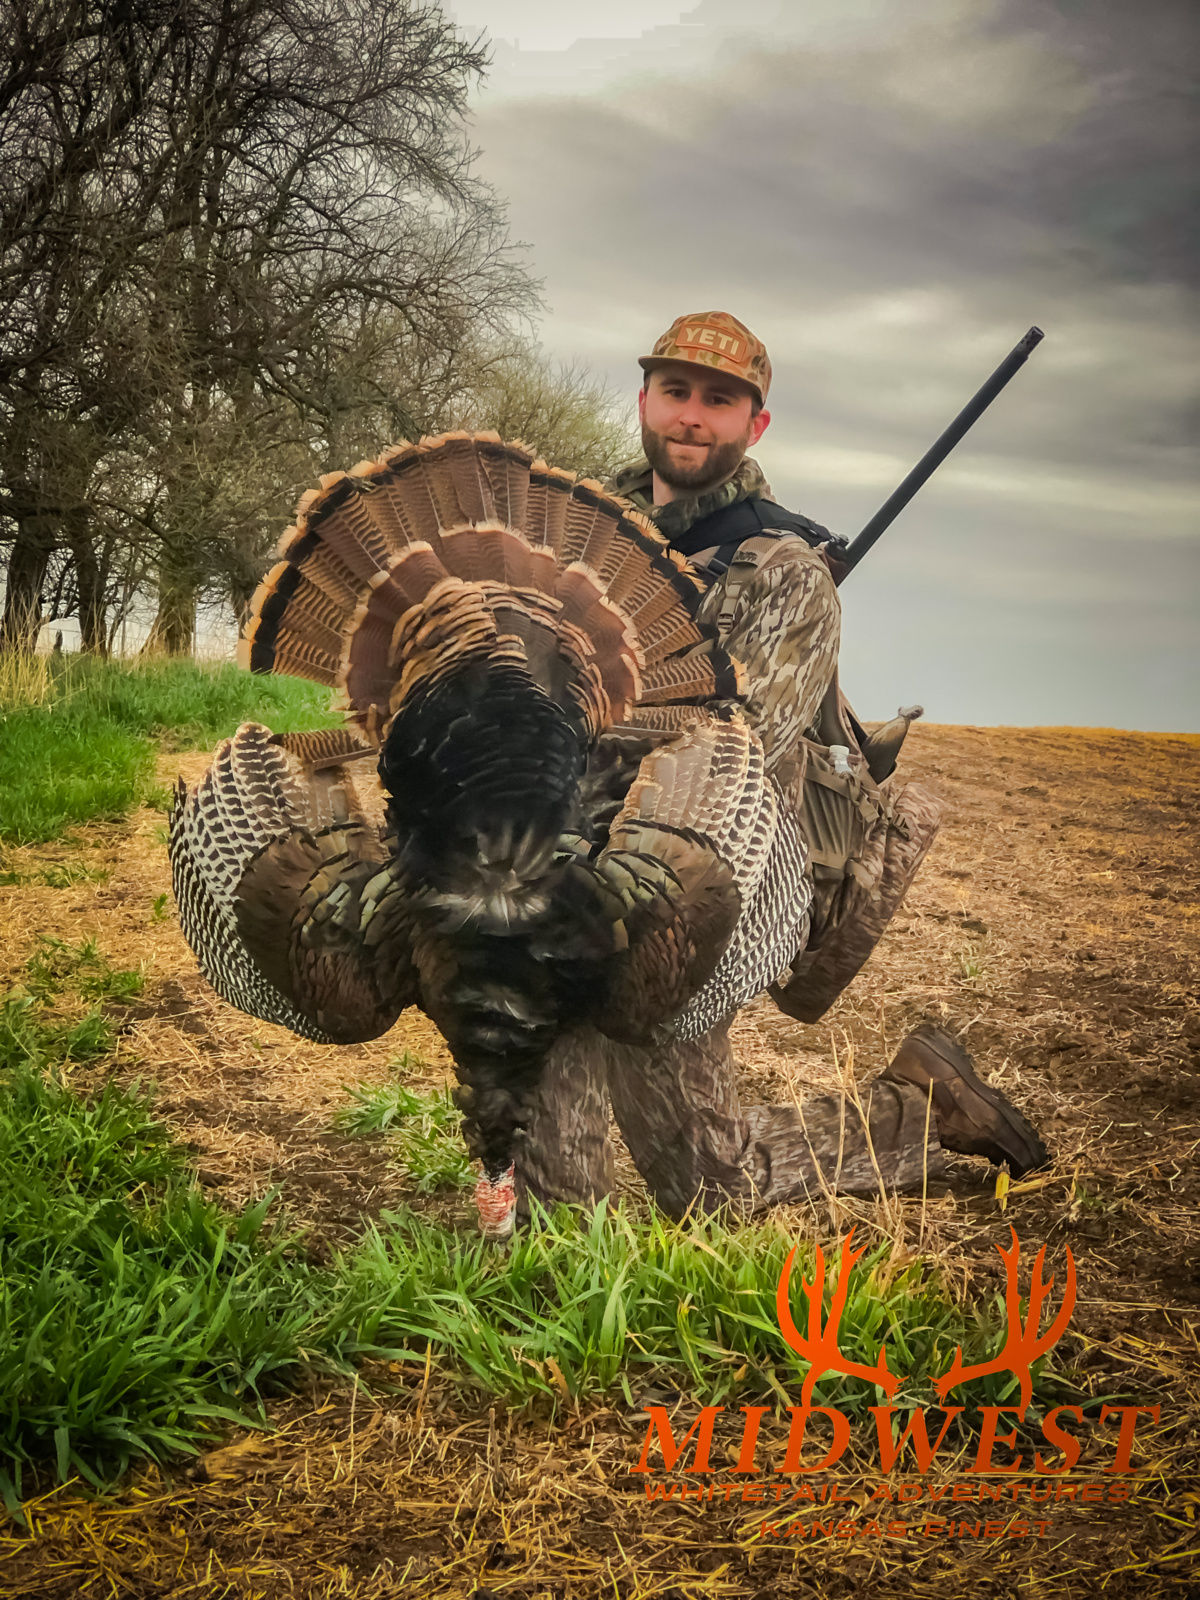 The Kansas turkey bow hunting of your dreams is just a click away